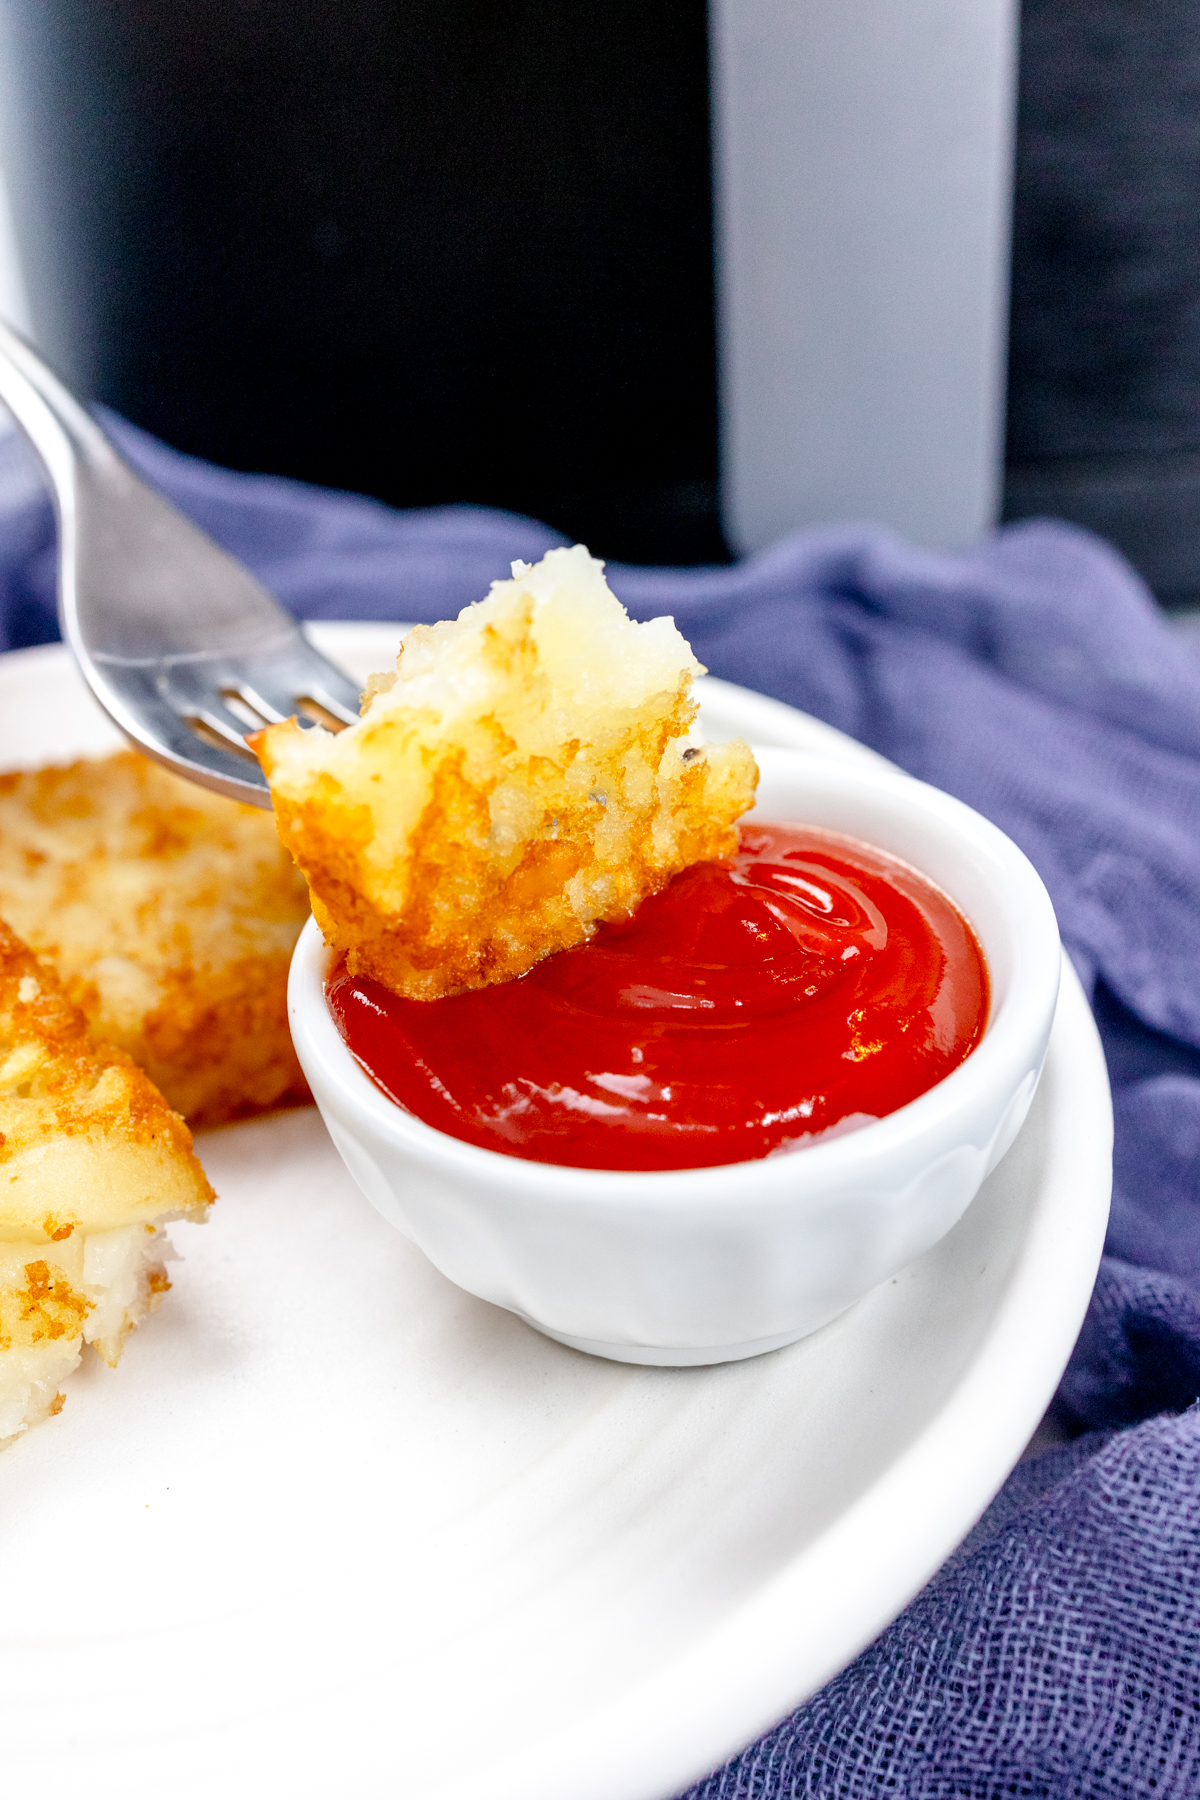 Close up view of a fork dipping a piece of hash brown into a pot of tomato ketchup, on a white plate.